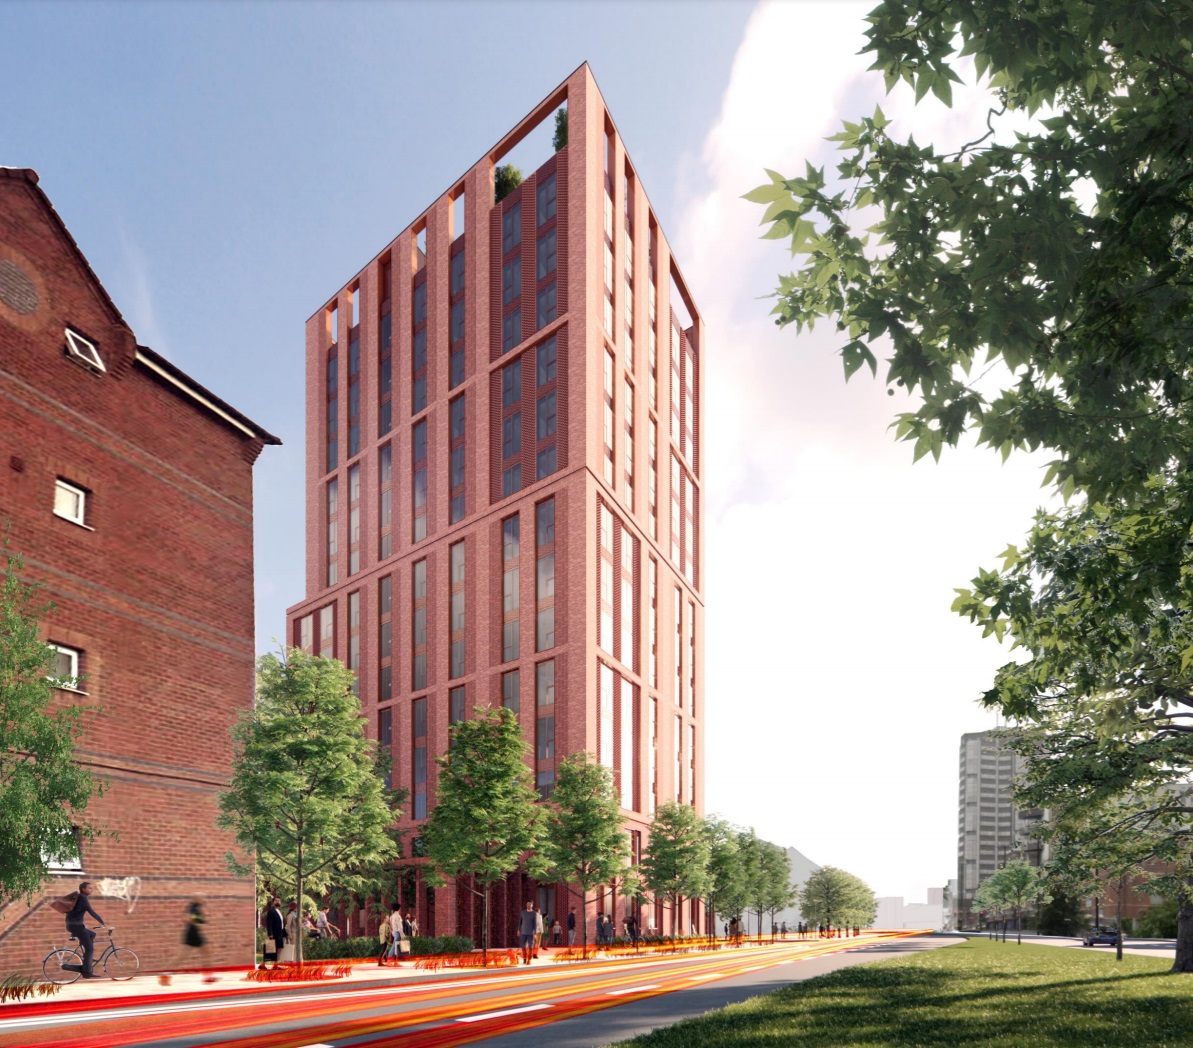 GO-AHEAD RECOMMENDED FOR 14 STOREY RESI BLOCK